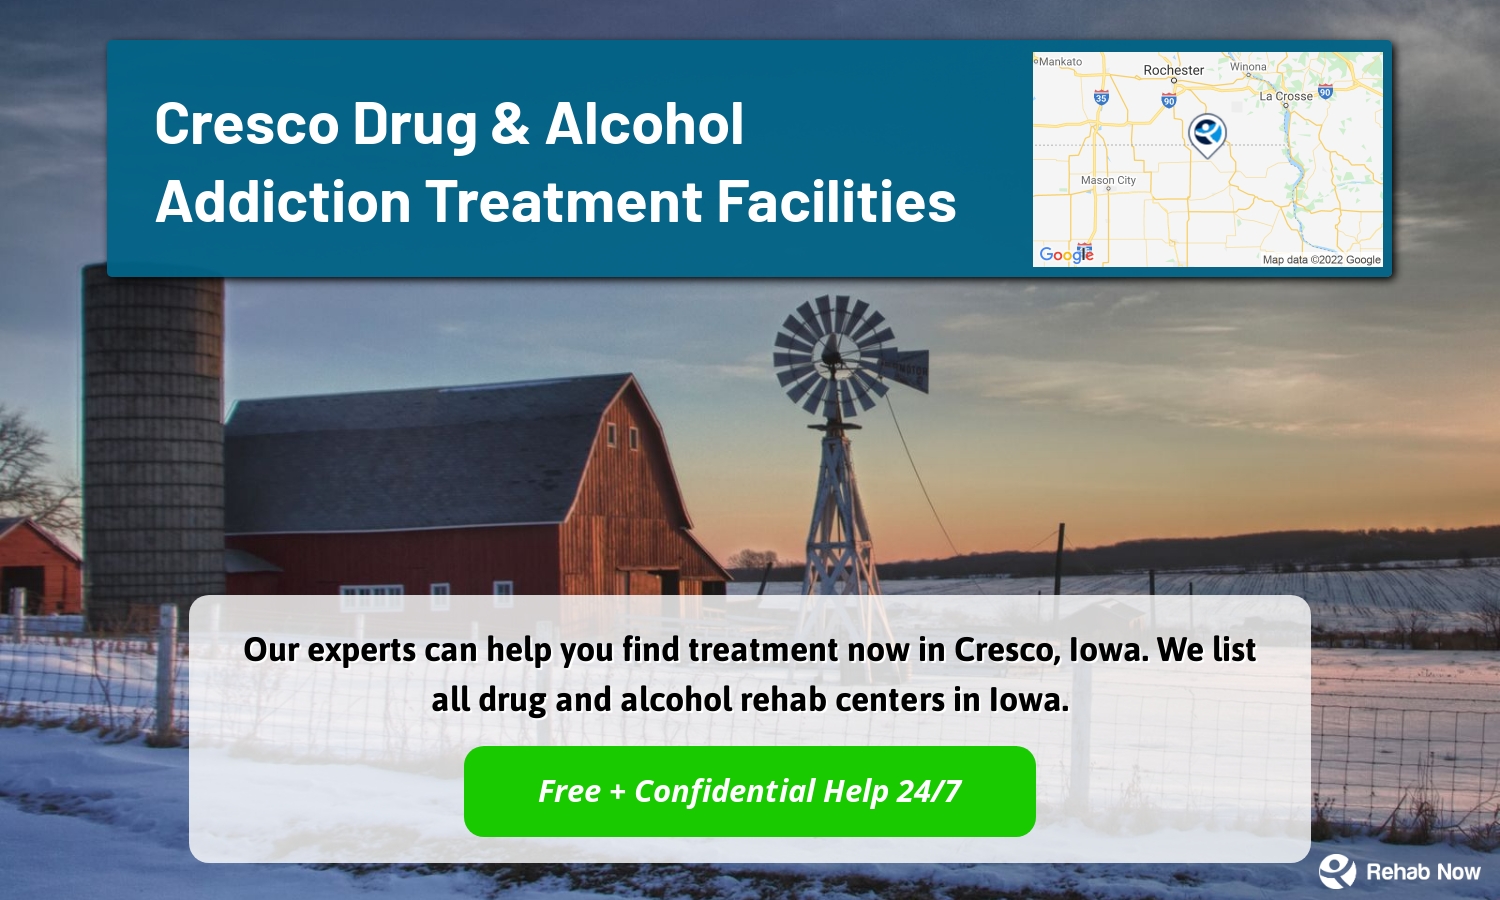 Our experts can help you find treatment now in Cresco, Iowa. We list all drug and alcohol rehab centers in Iowa.